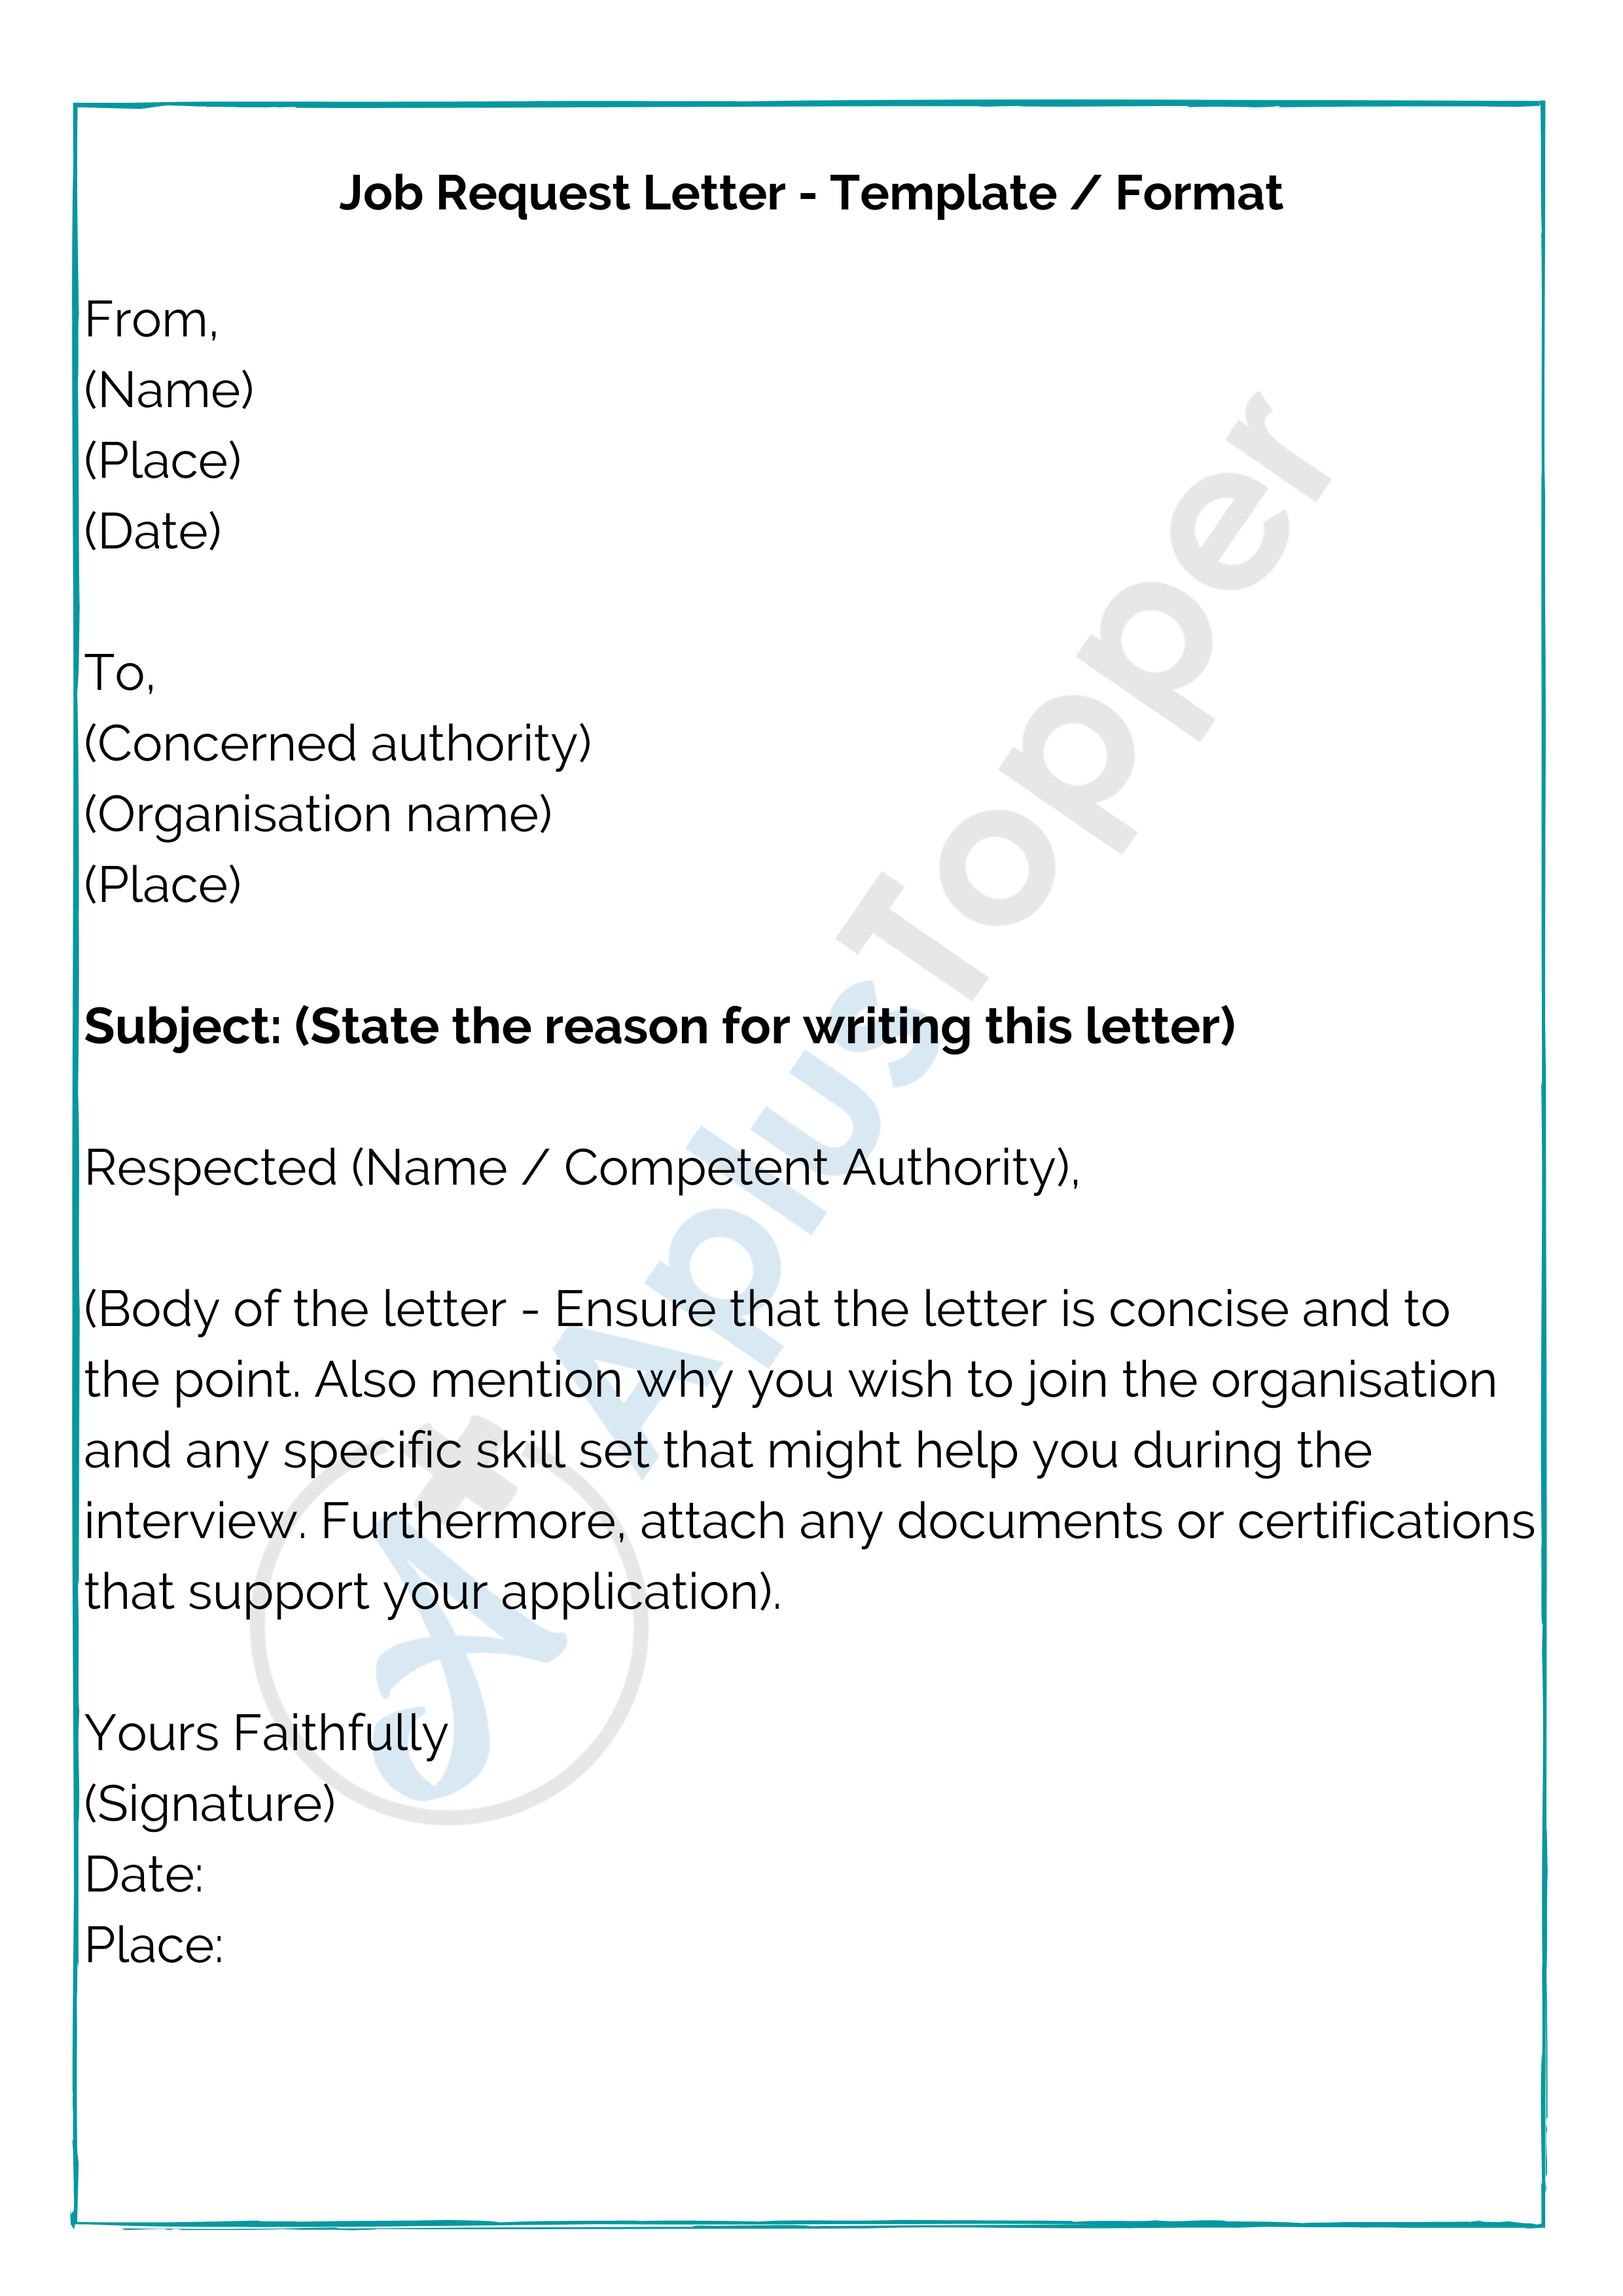 Job Request Letter How To Write Job Request Letter Format Sample And Guidelines A Plus Topper